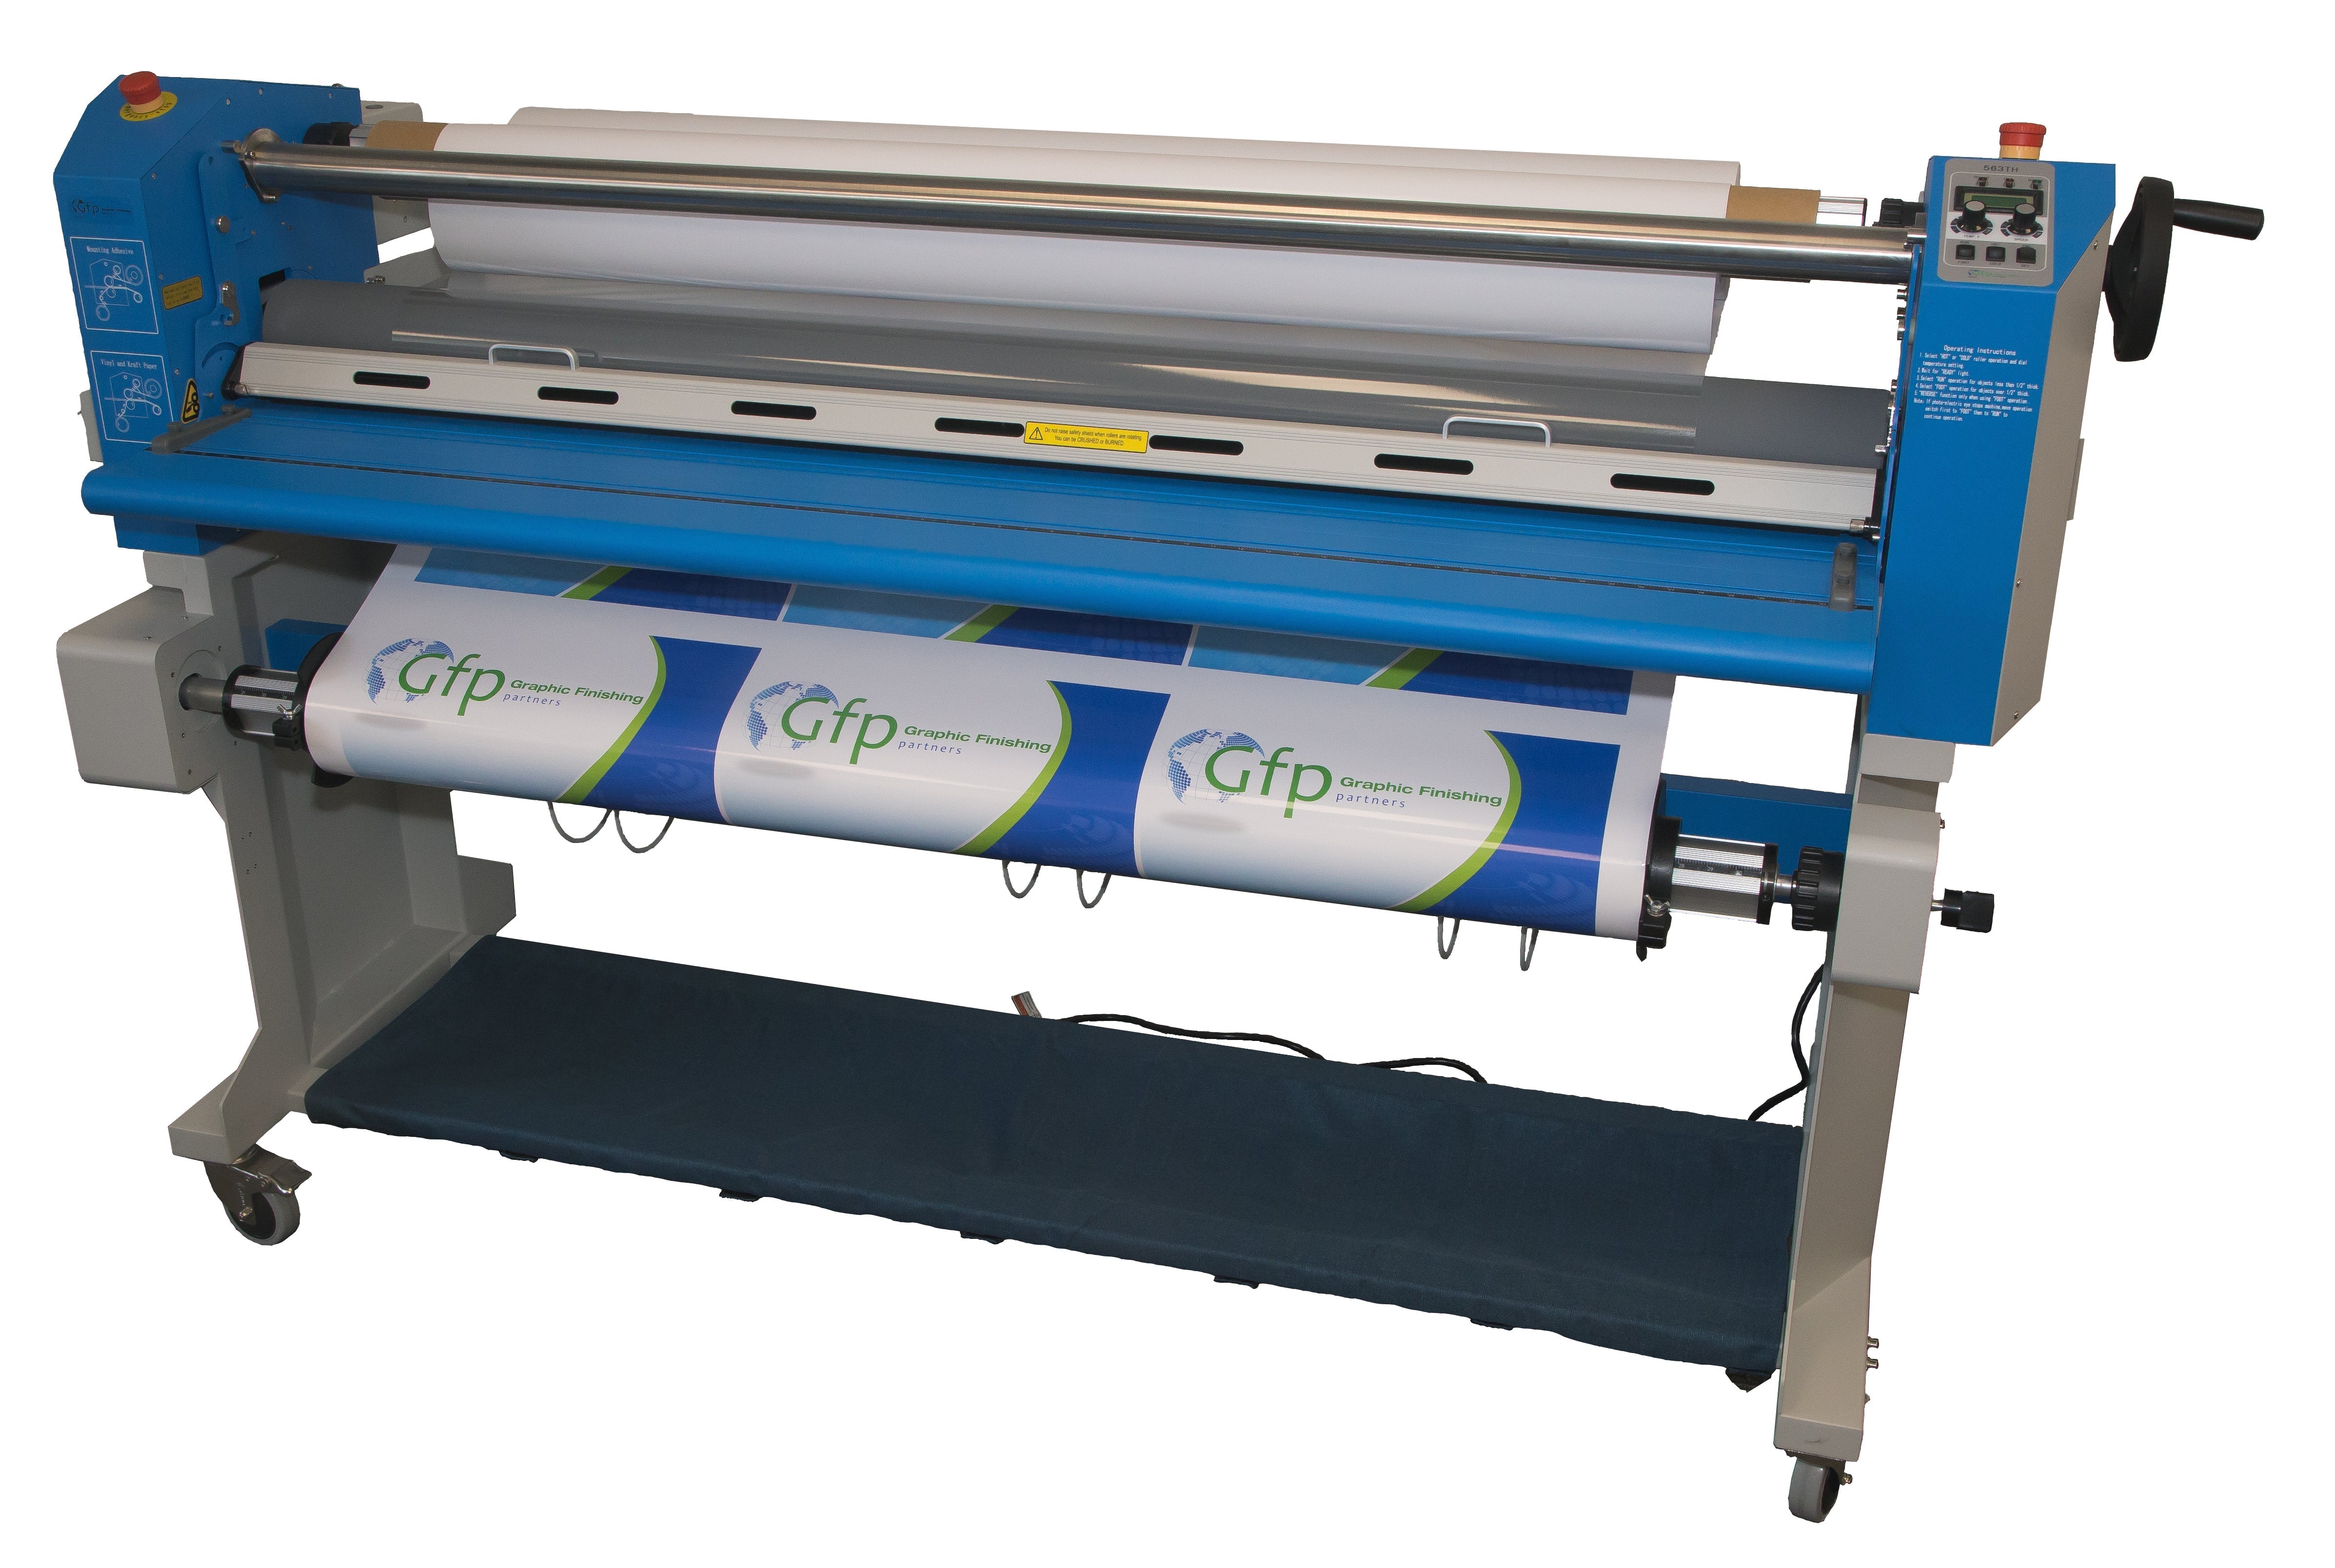 "GFP-563TH-4 Laminator" - A powerful and efficient laminator by GFP, offering top heat technology for professional results.